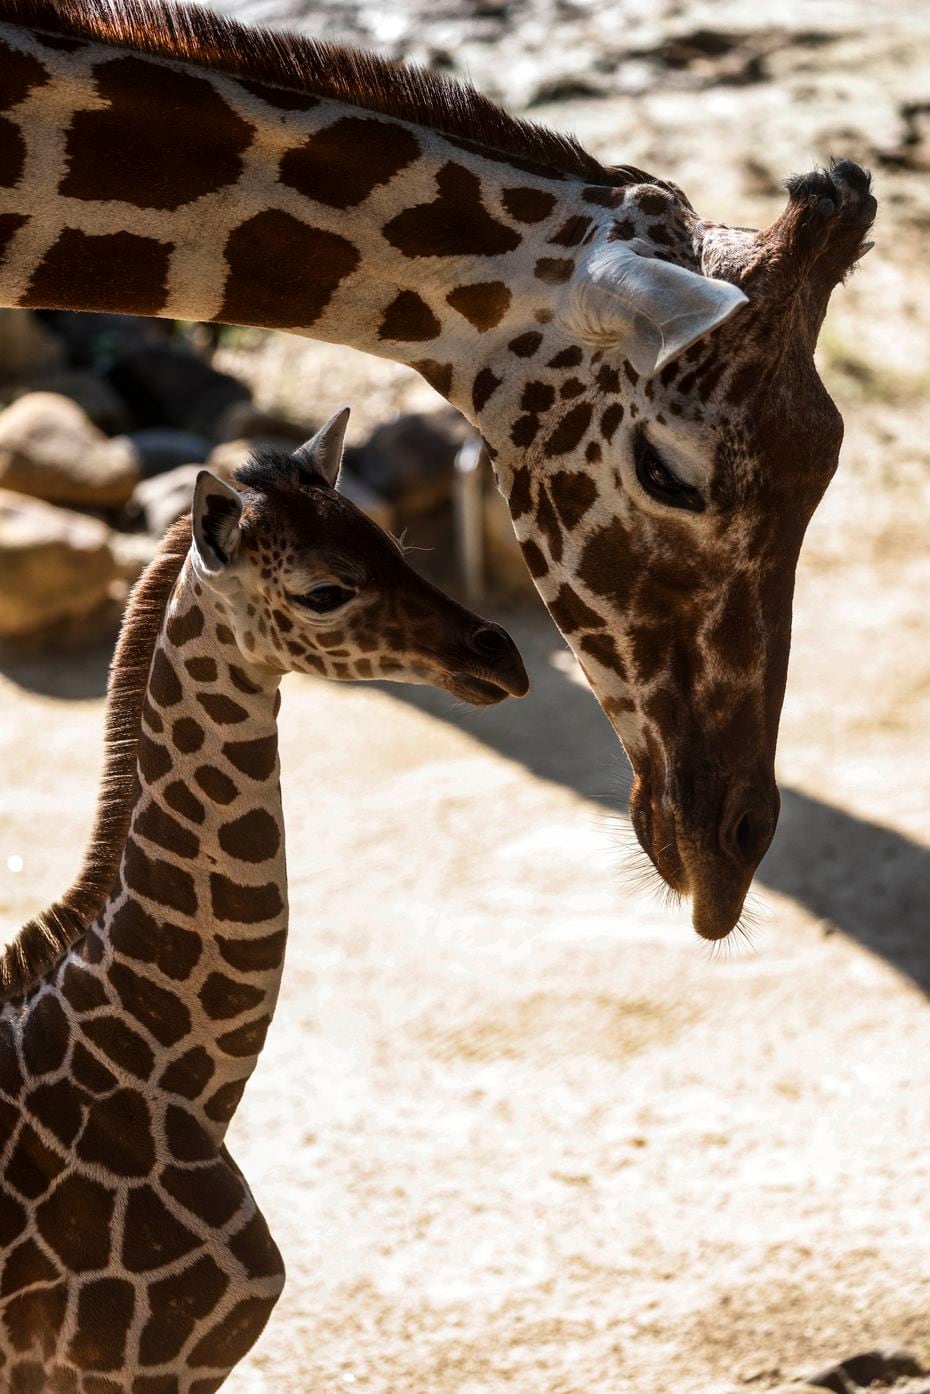 Marekani, born on the Fourth of July, made her public debut in the Giants of the Savanna habitat alongside her mother, Chrystal, on July 8.